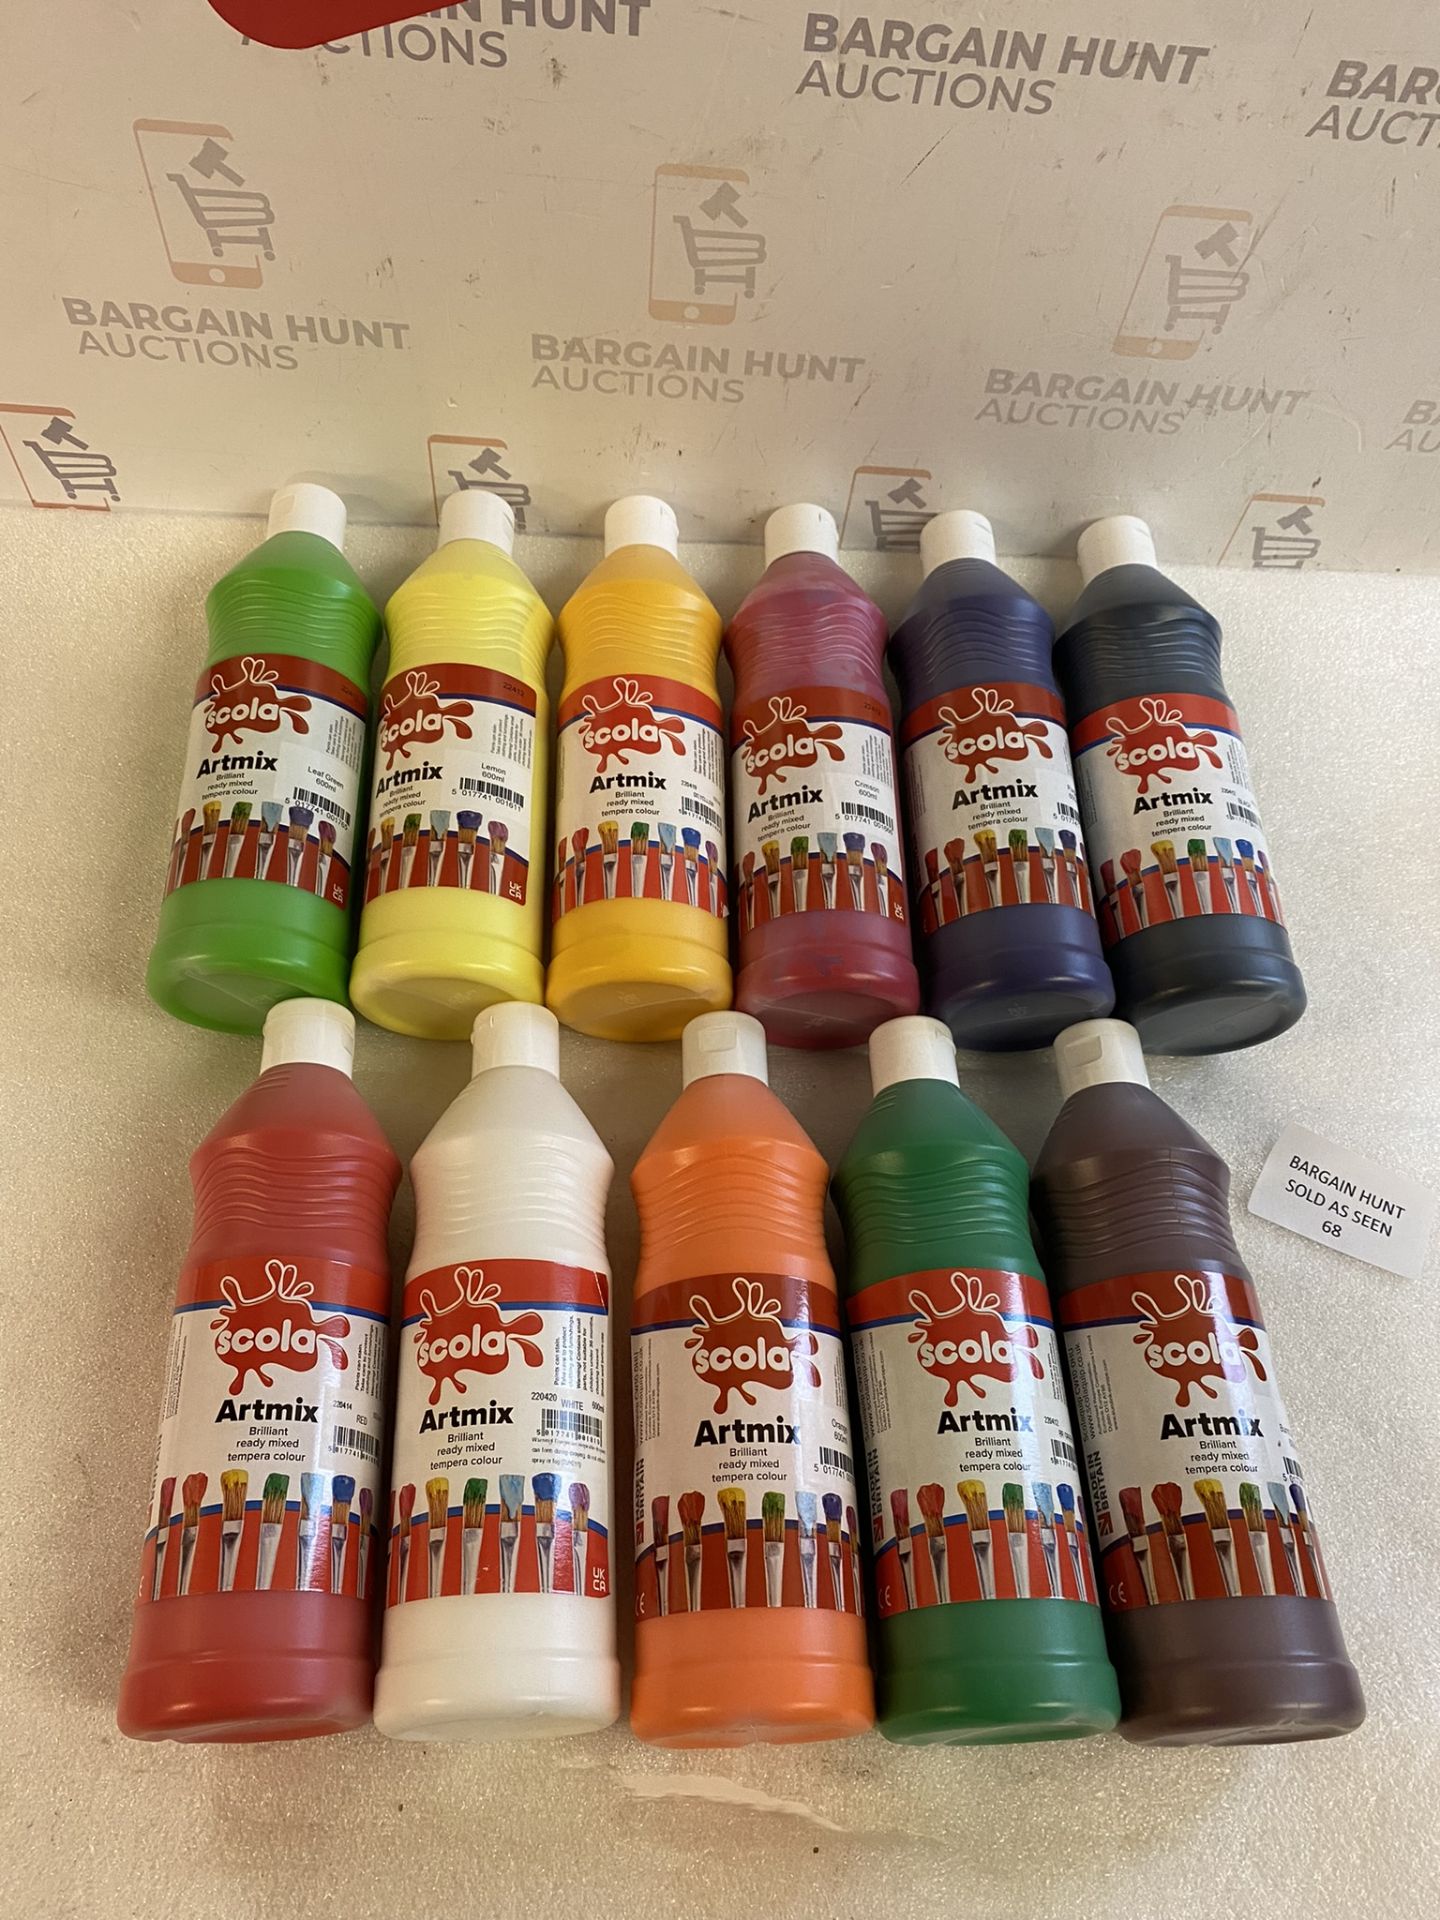 Scola Ready Mixed Water Based Paint Set, 600ml Bottles